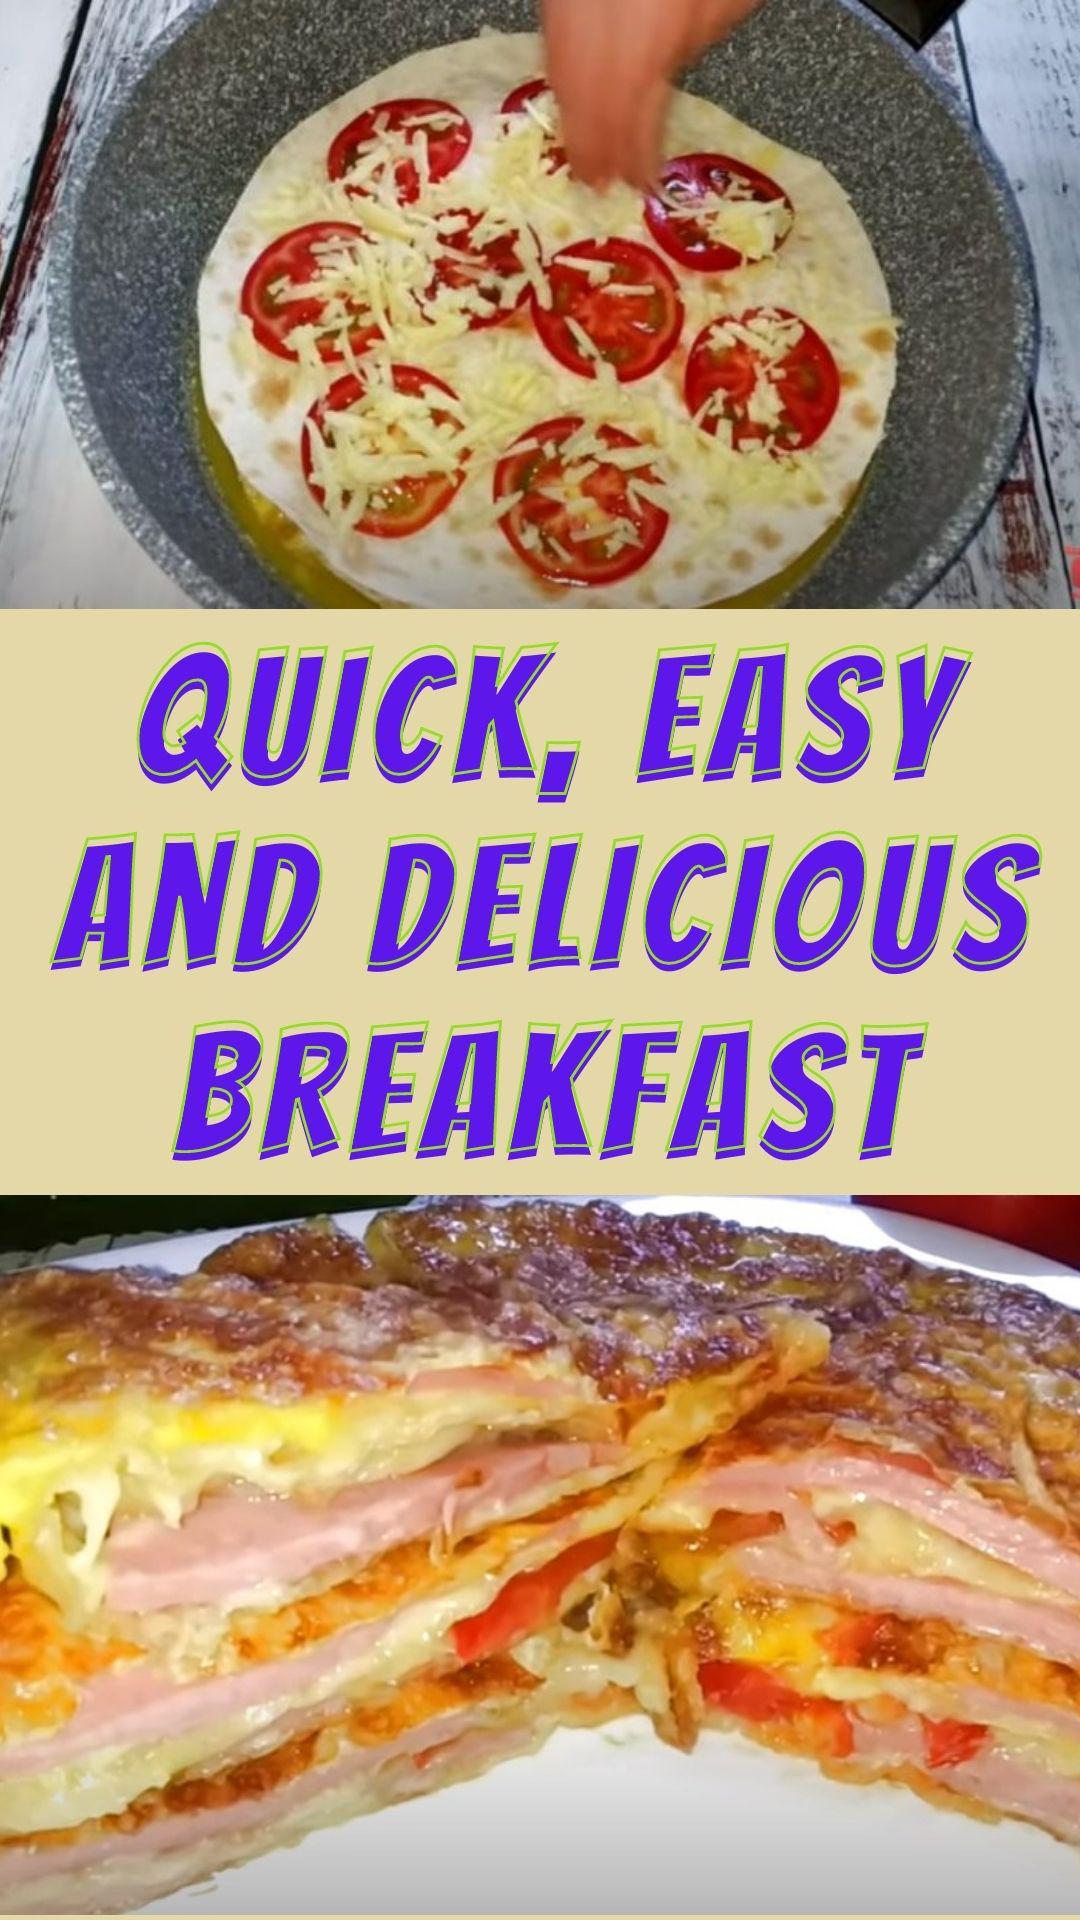 Quick, easy and delicious breakfast